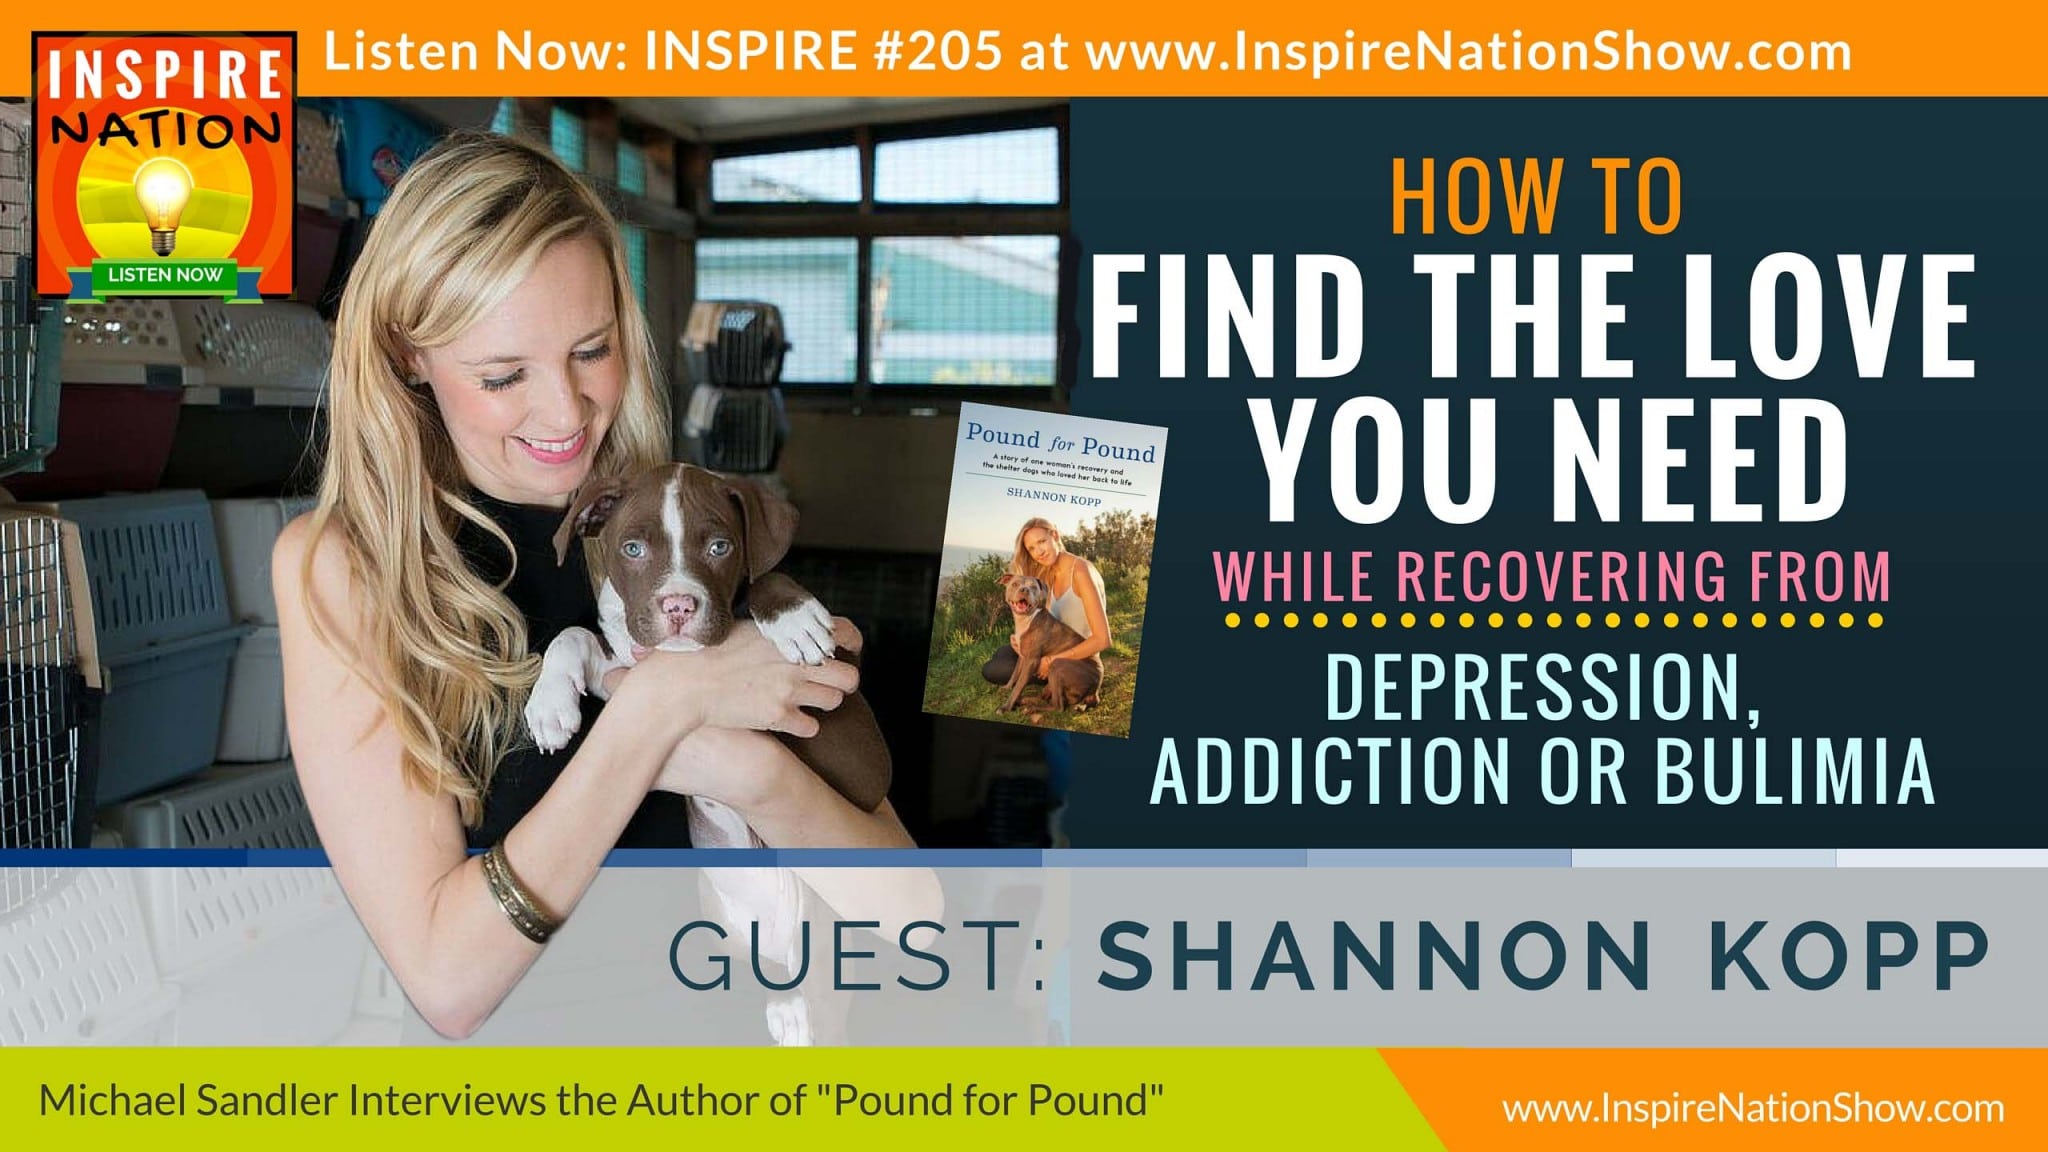 Listen to Michael Sandler's interview with Shannon Kopp on how rescue animals rescue us.